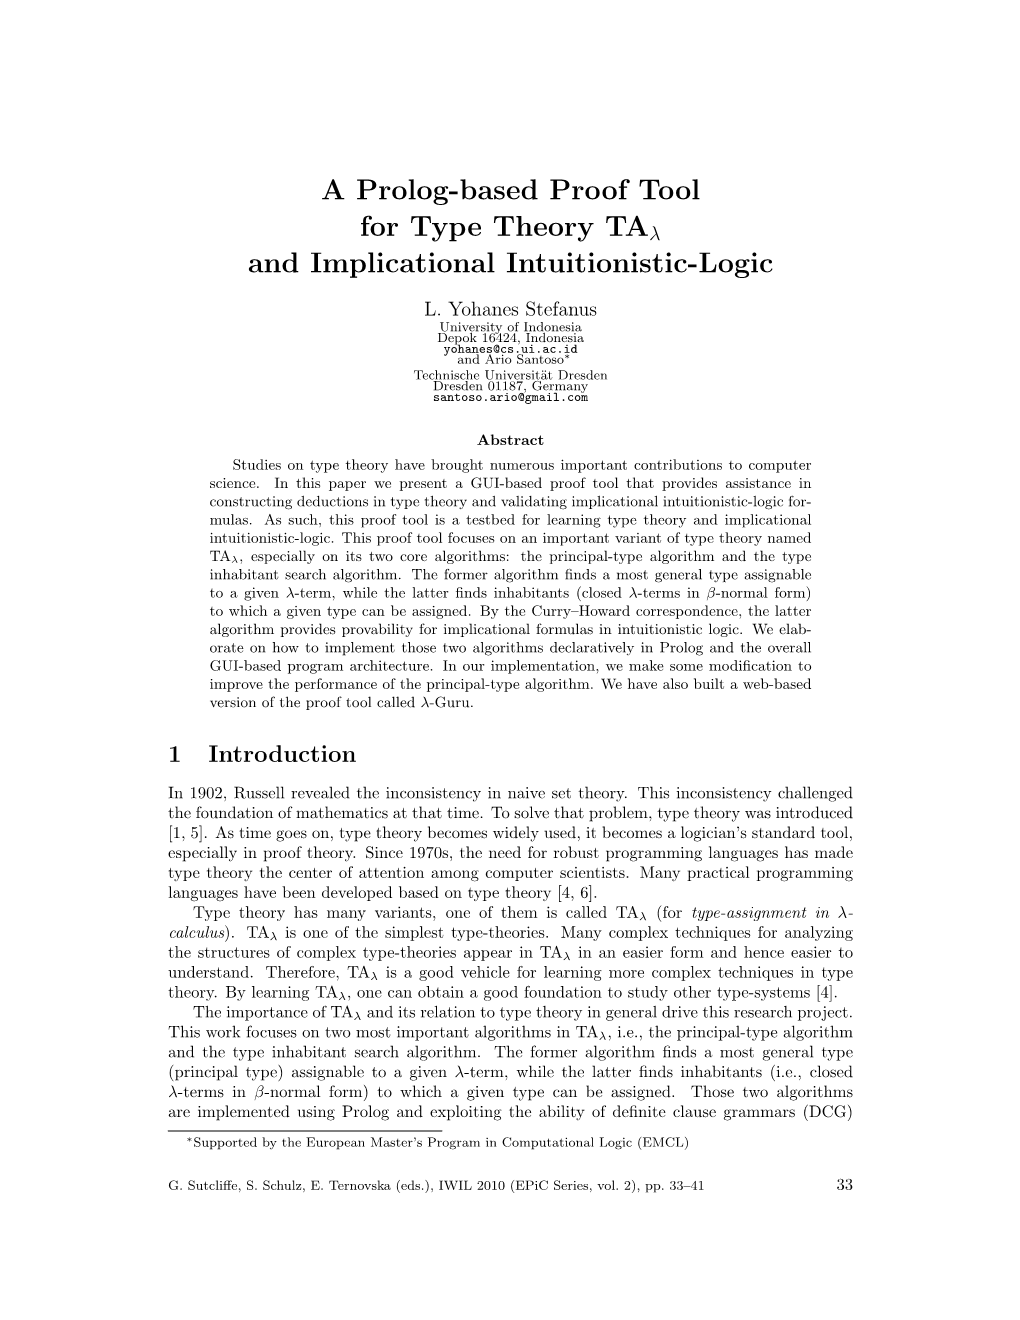 A Prolog-Based Proof Tool for Type Theory Taλ and Implicational Intuitionistic-Logic